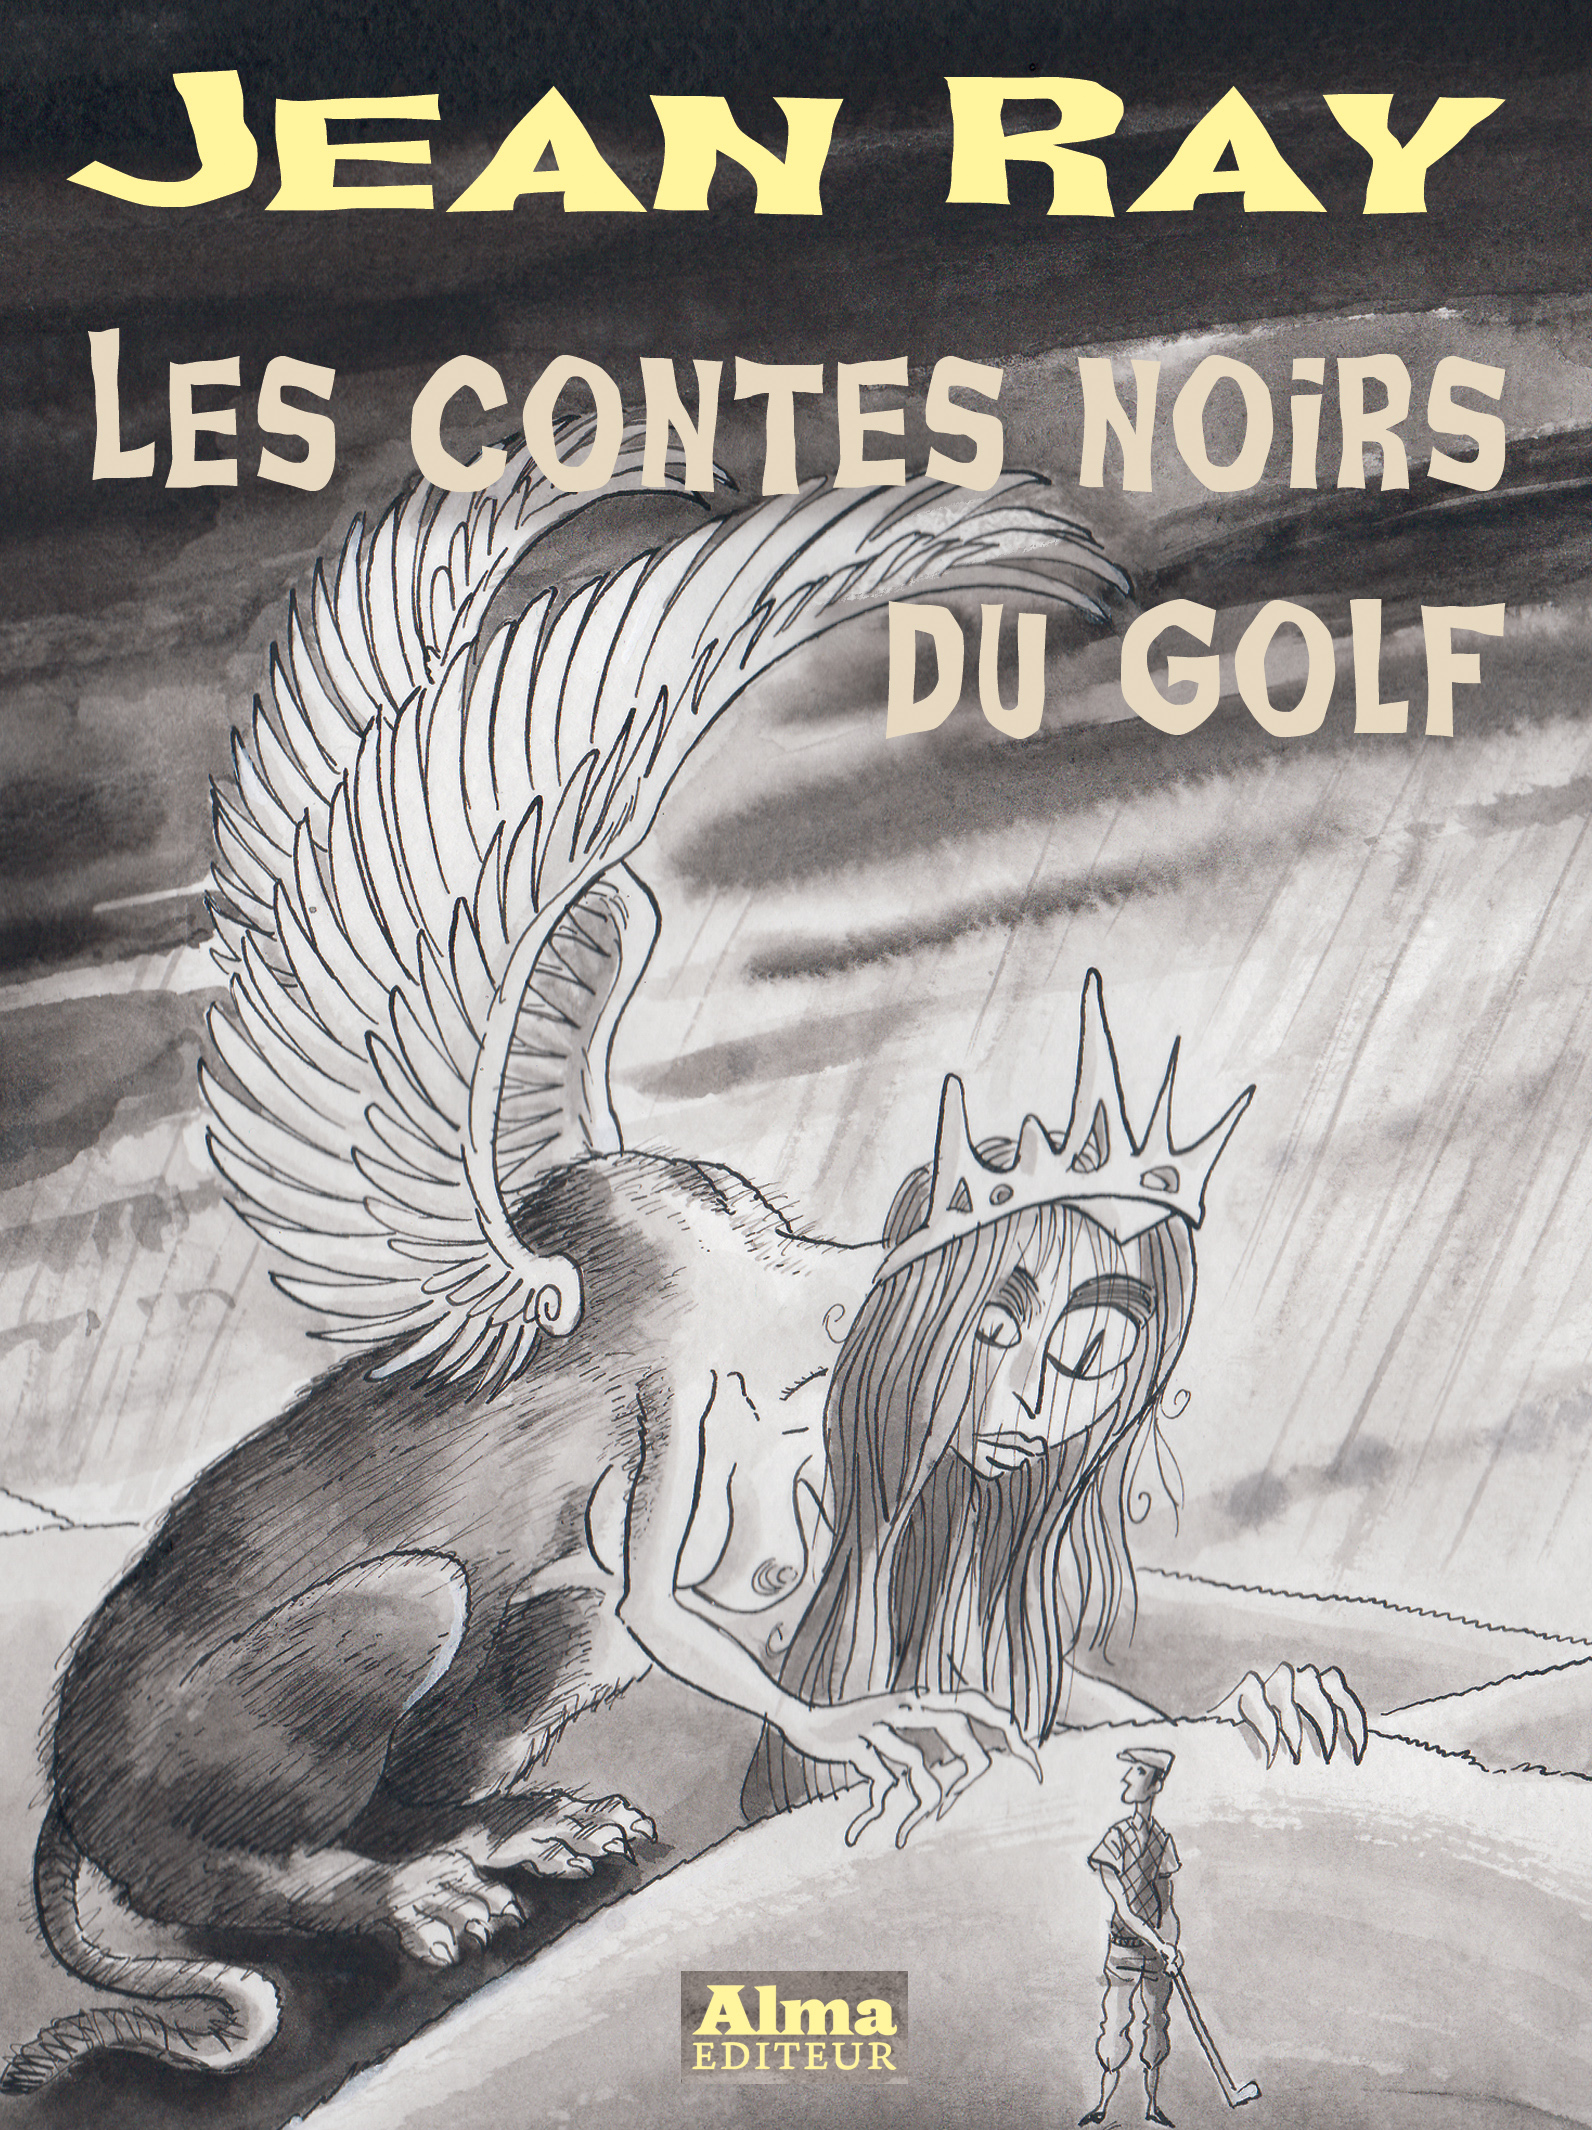 Philippe Foerster Mu Blondeau Les contes noirs du golf Jean Ray Alma